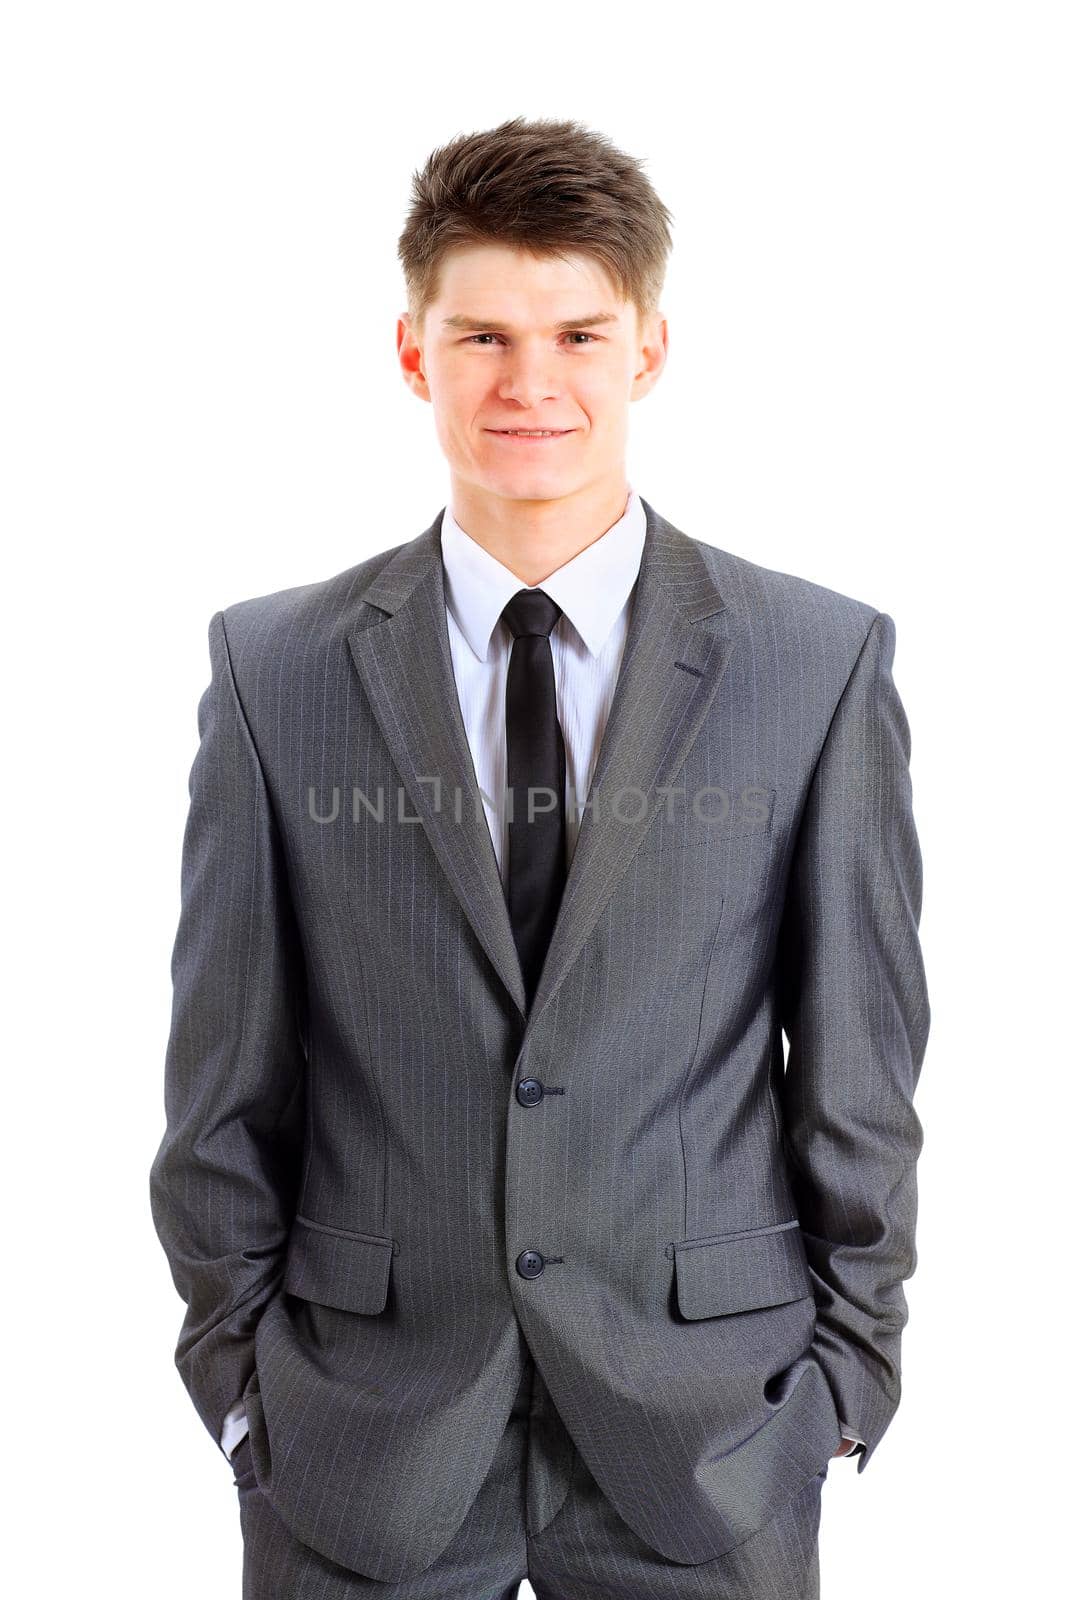 young business man isolated on white background by SmartPhotoLab